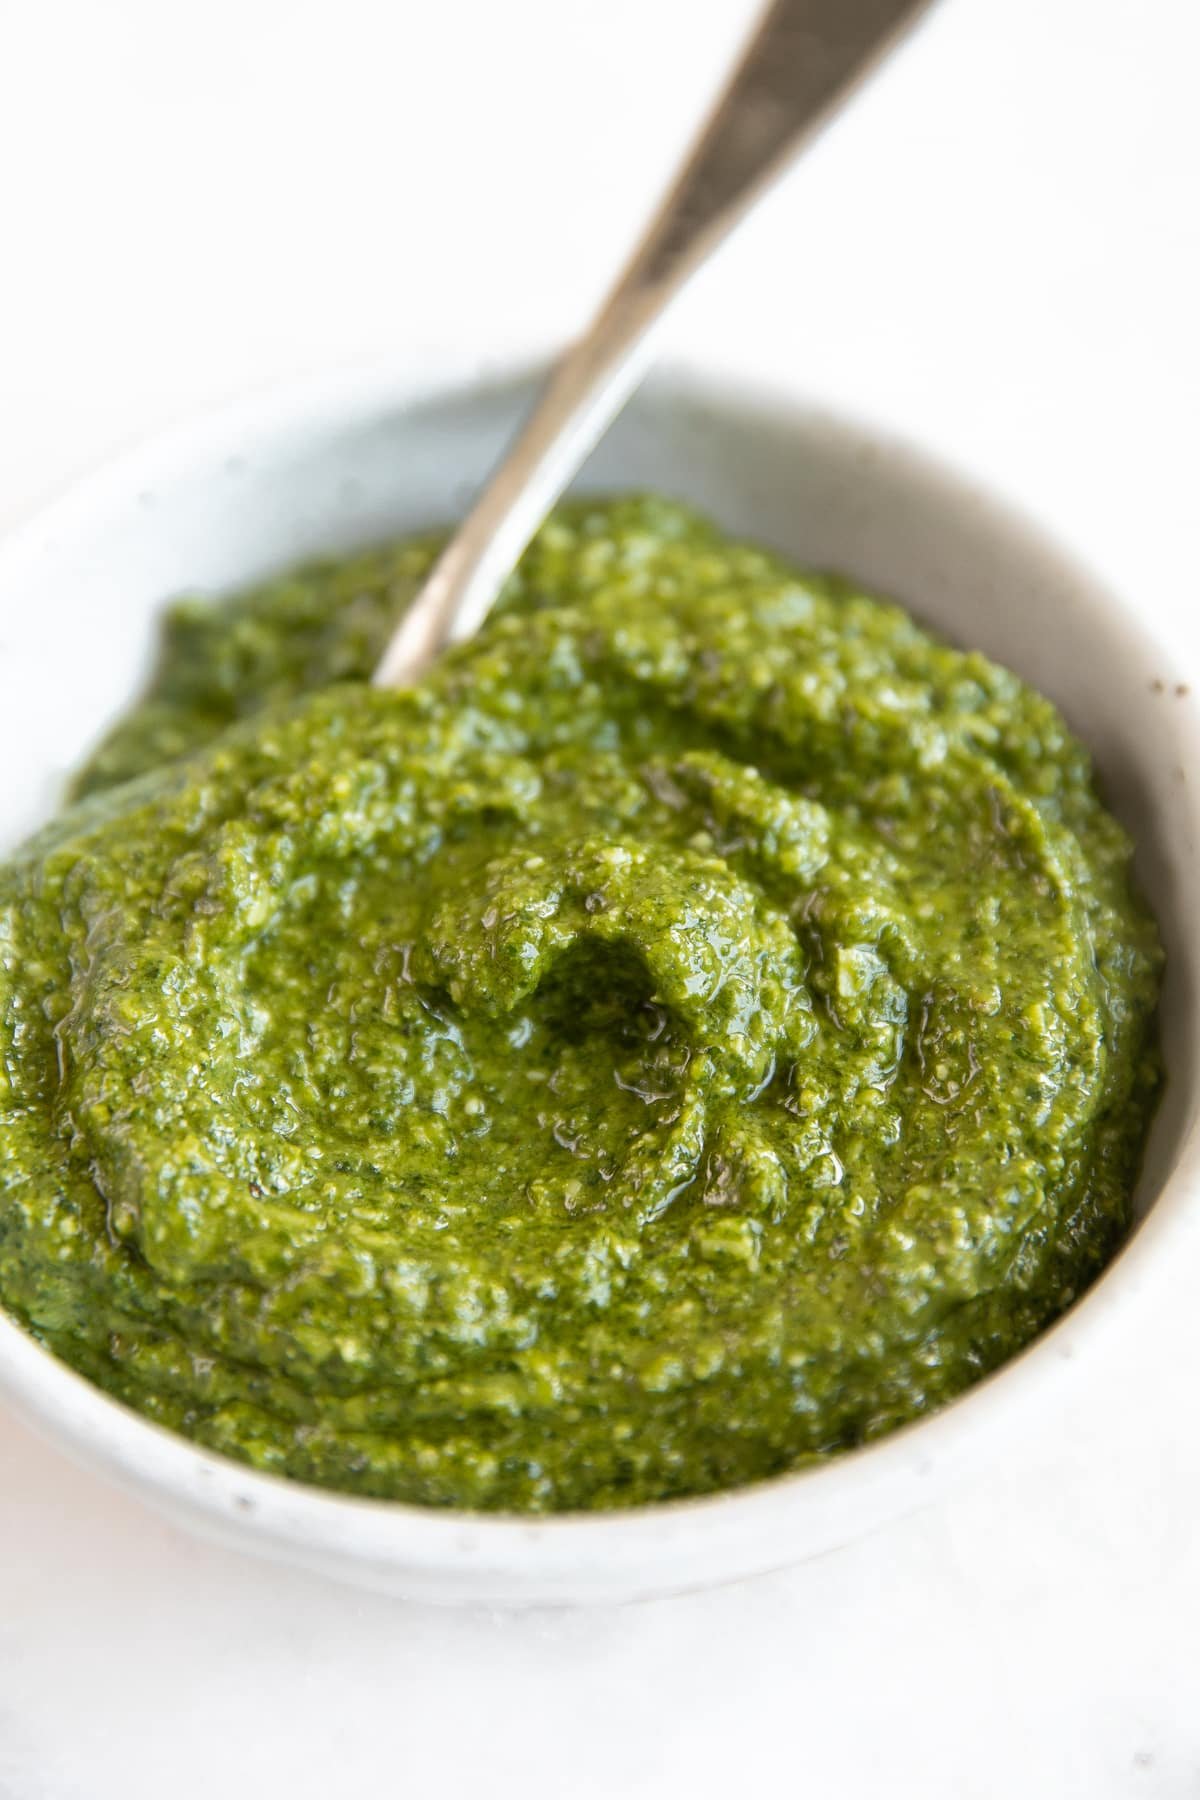 Close up image of freshly processed pesto sauce in a small white bowl.